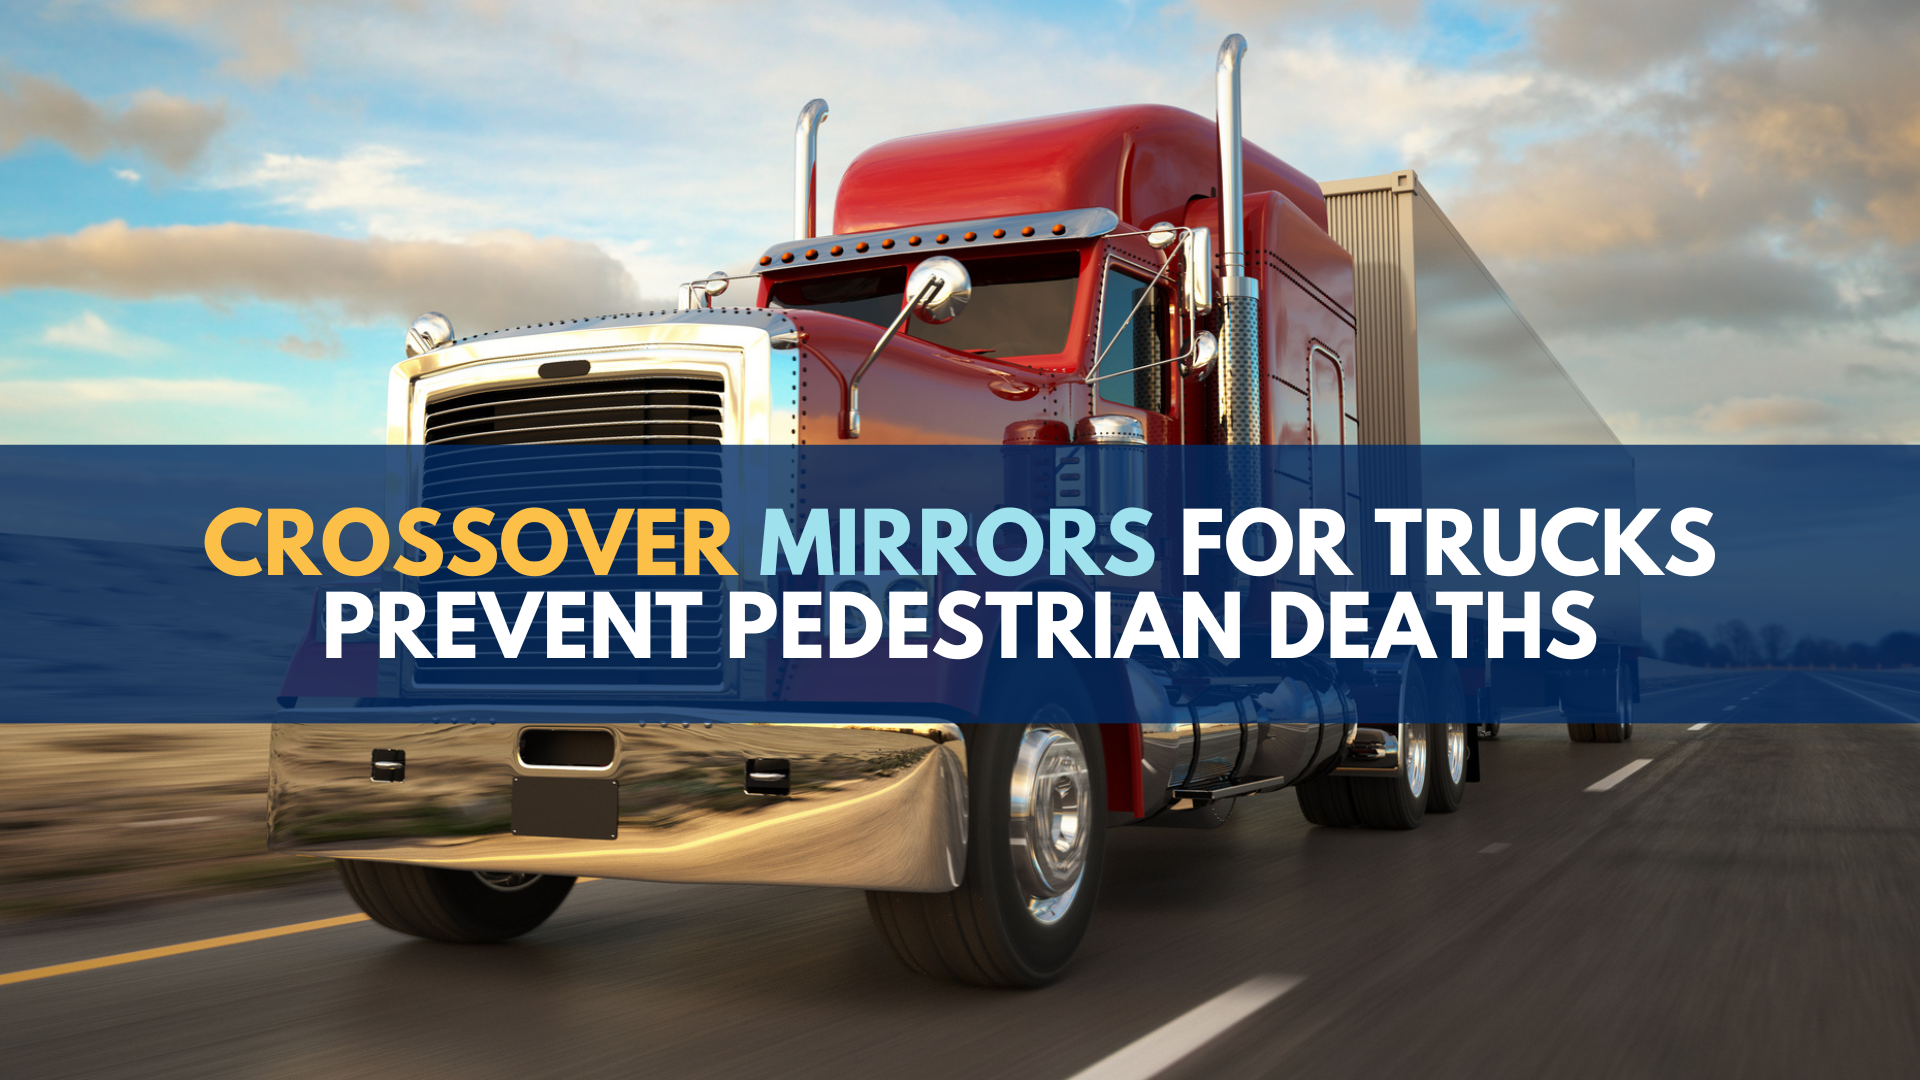 Crossover mirrors for trucks prevent deaths